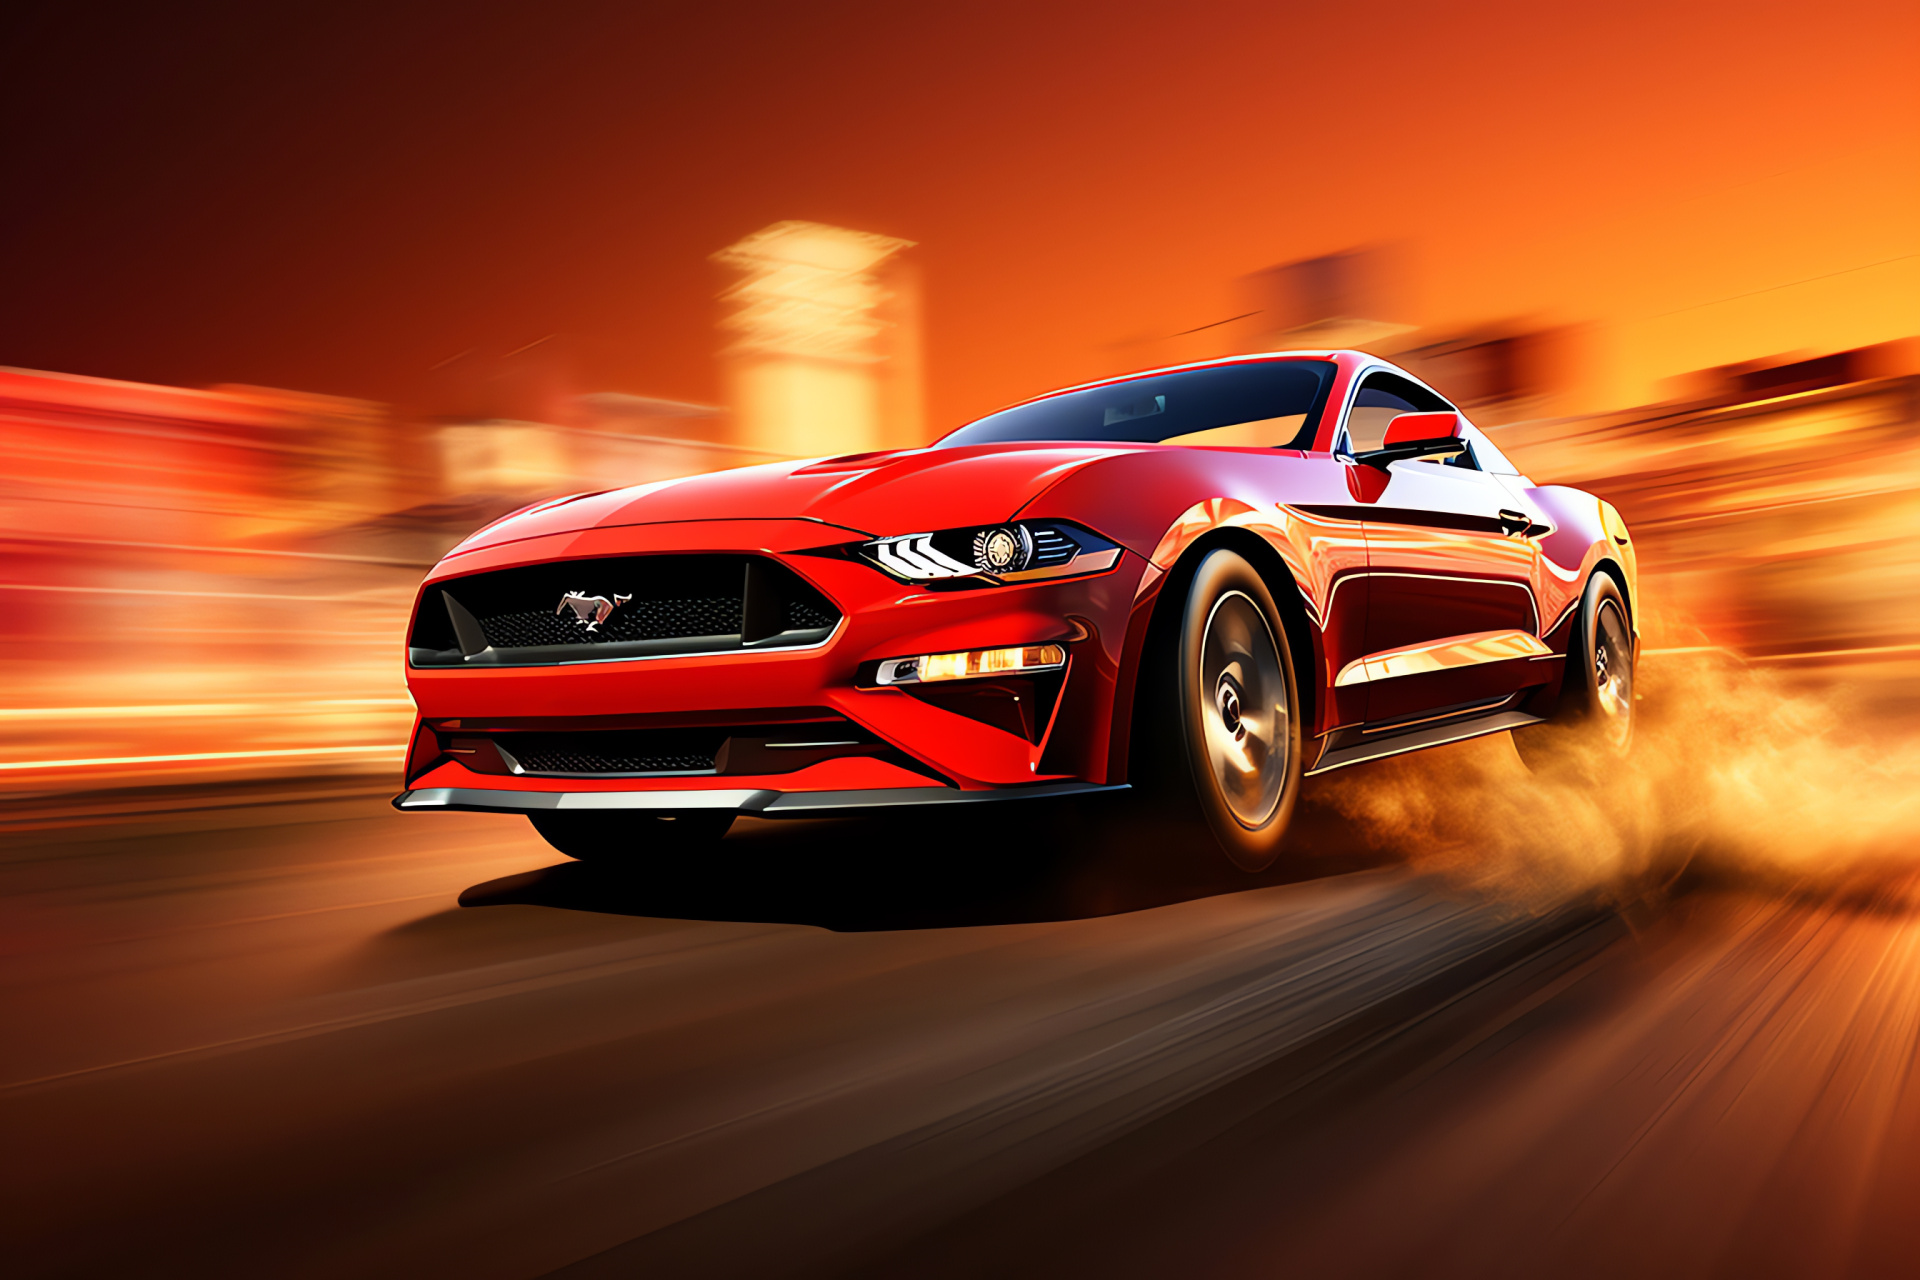 Ford Mustang display, Pure red intensity, Expansive viewing angle, Automotive prowess, Electric muscle car, HD Desktop Image